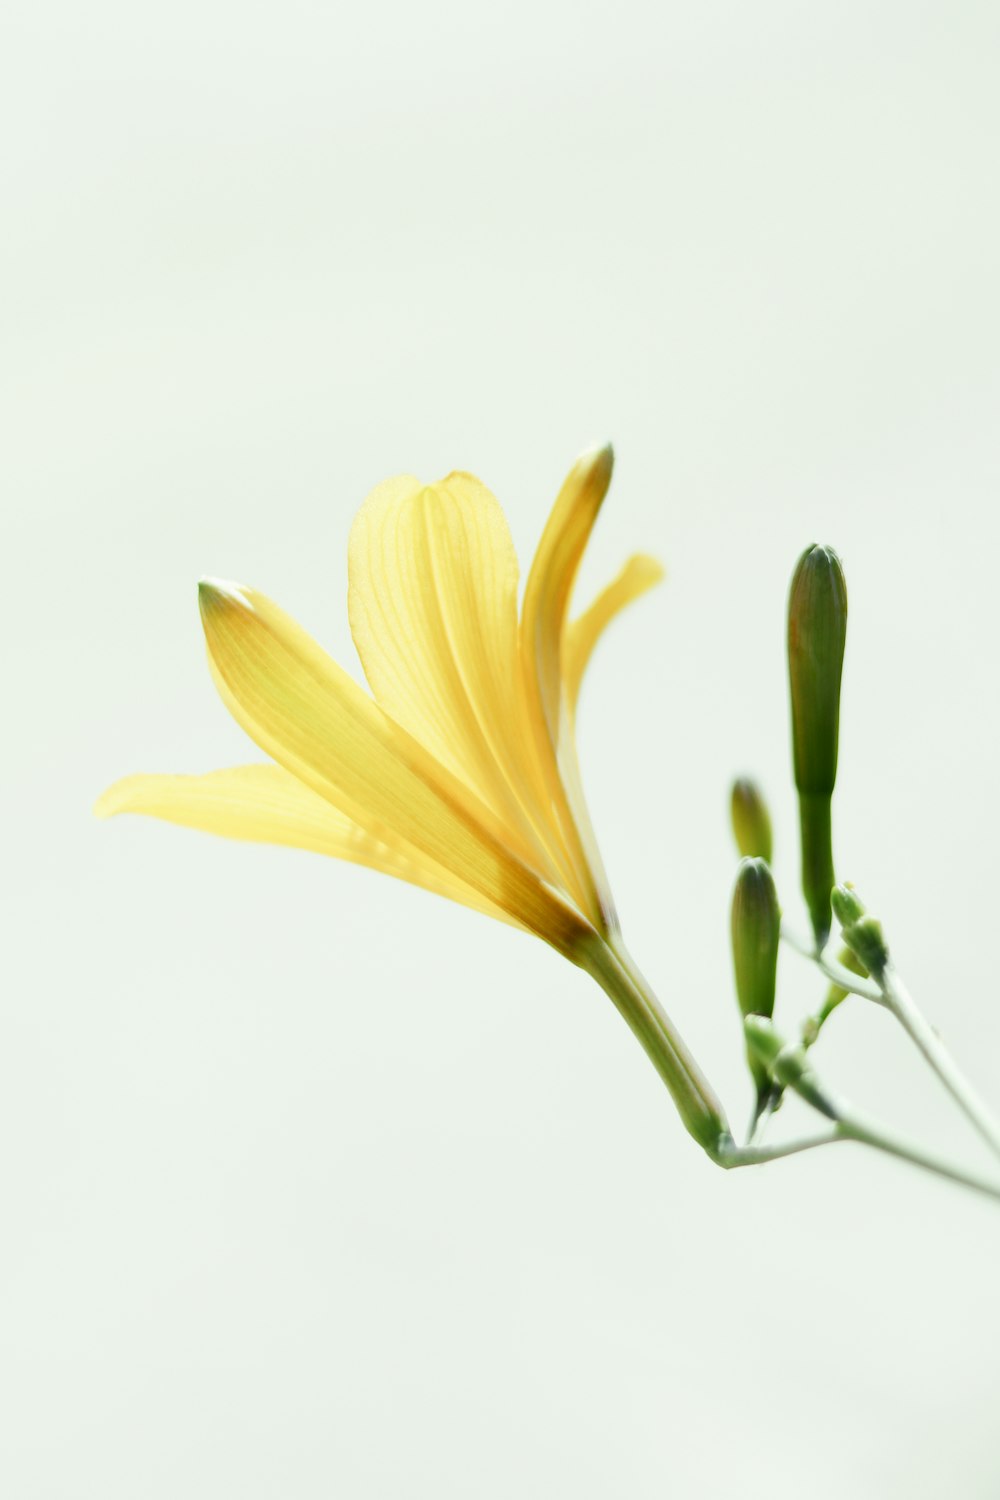 yellow flower with green stem